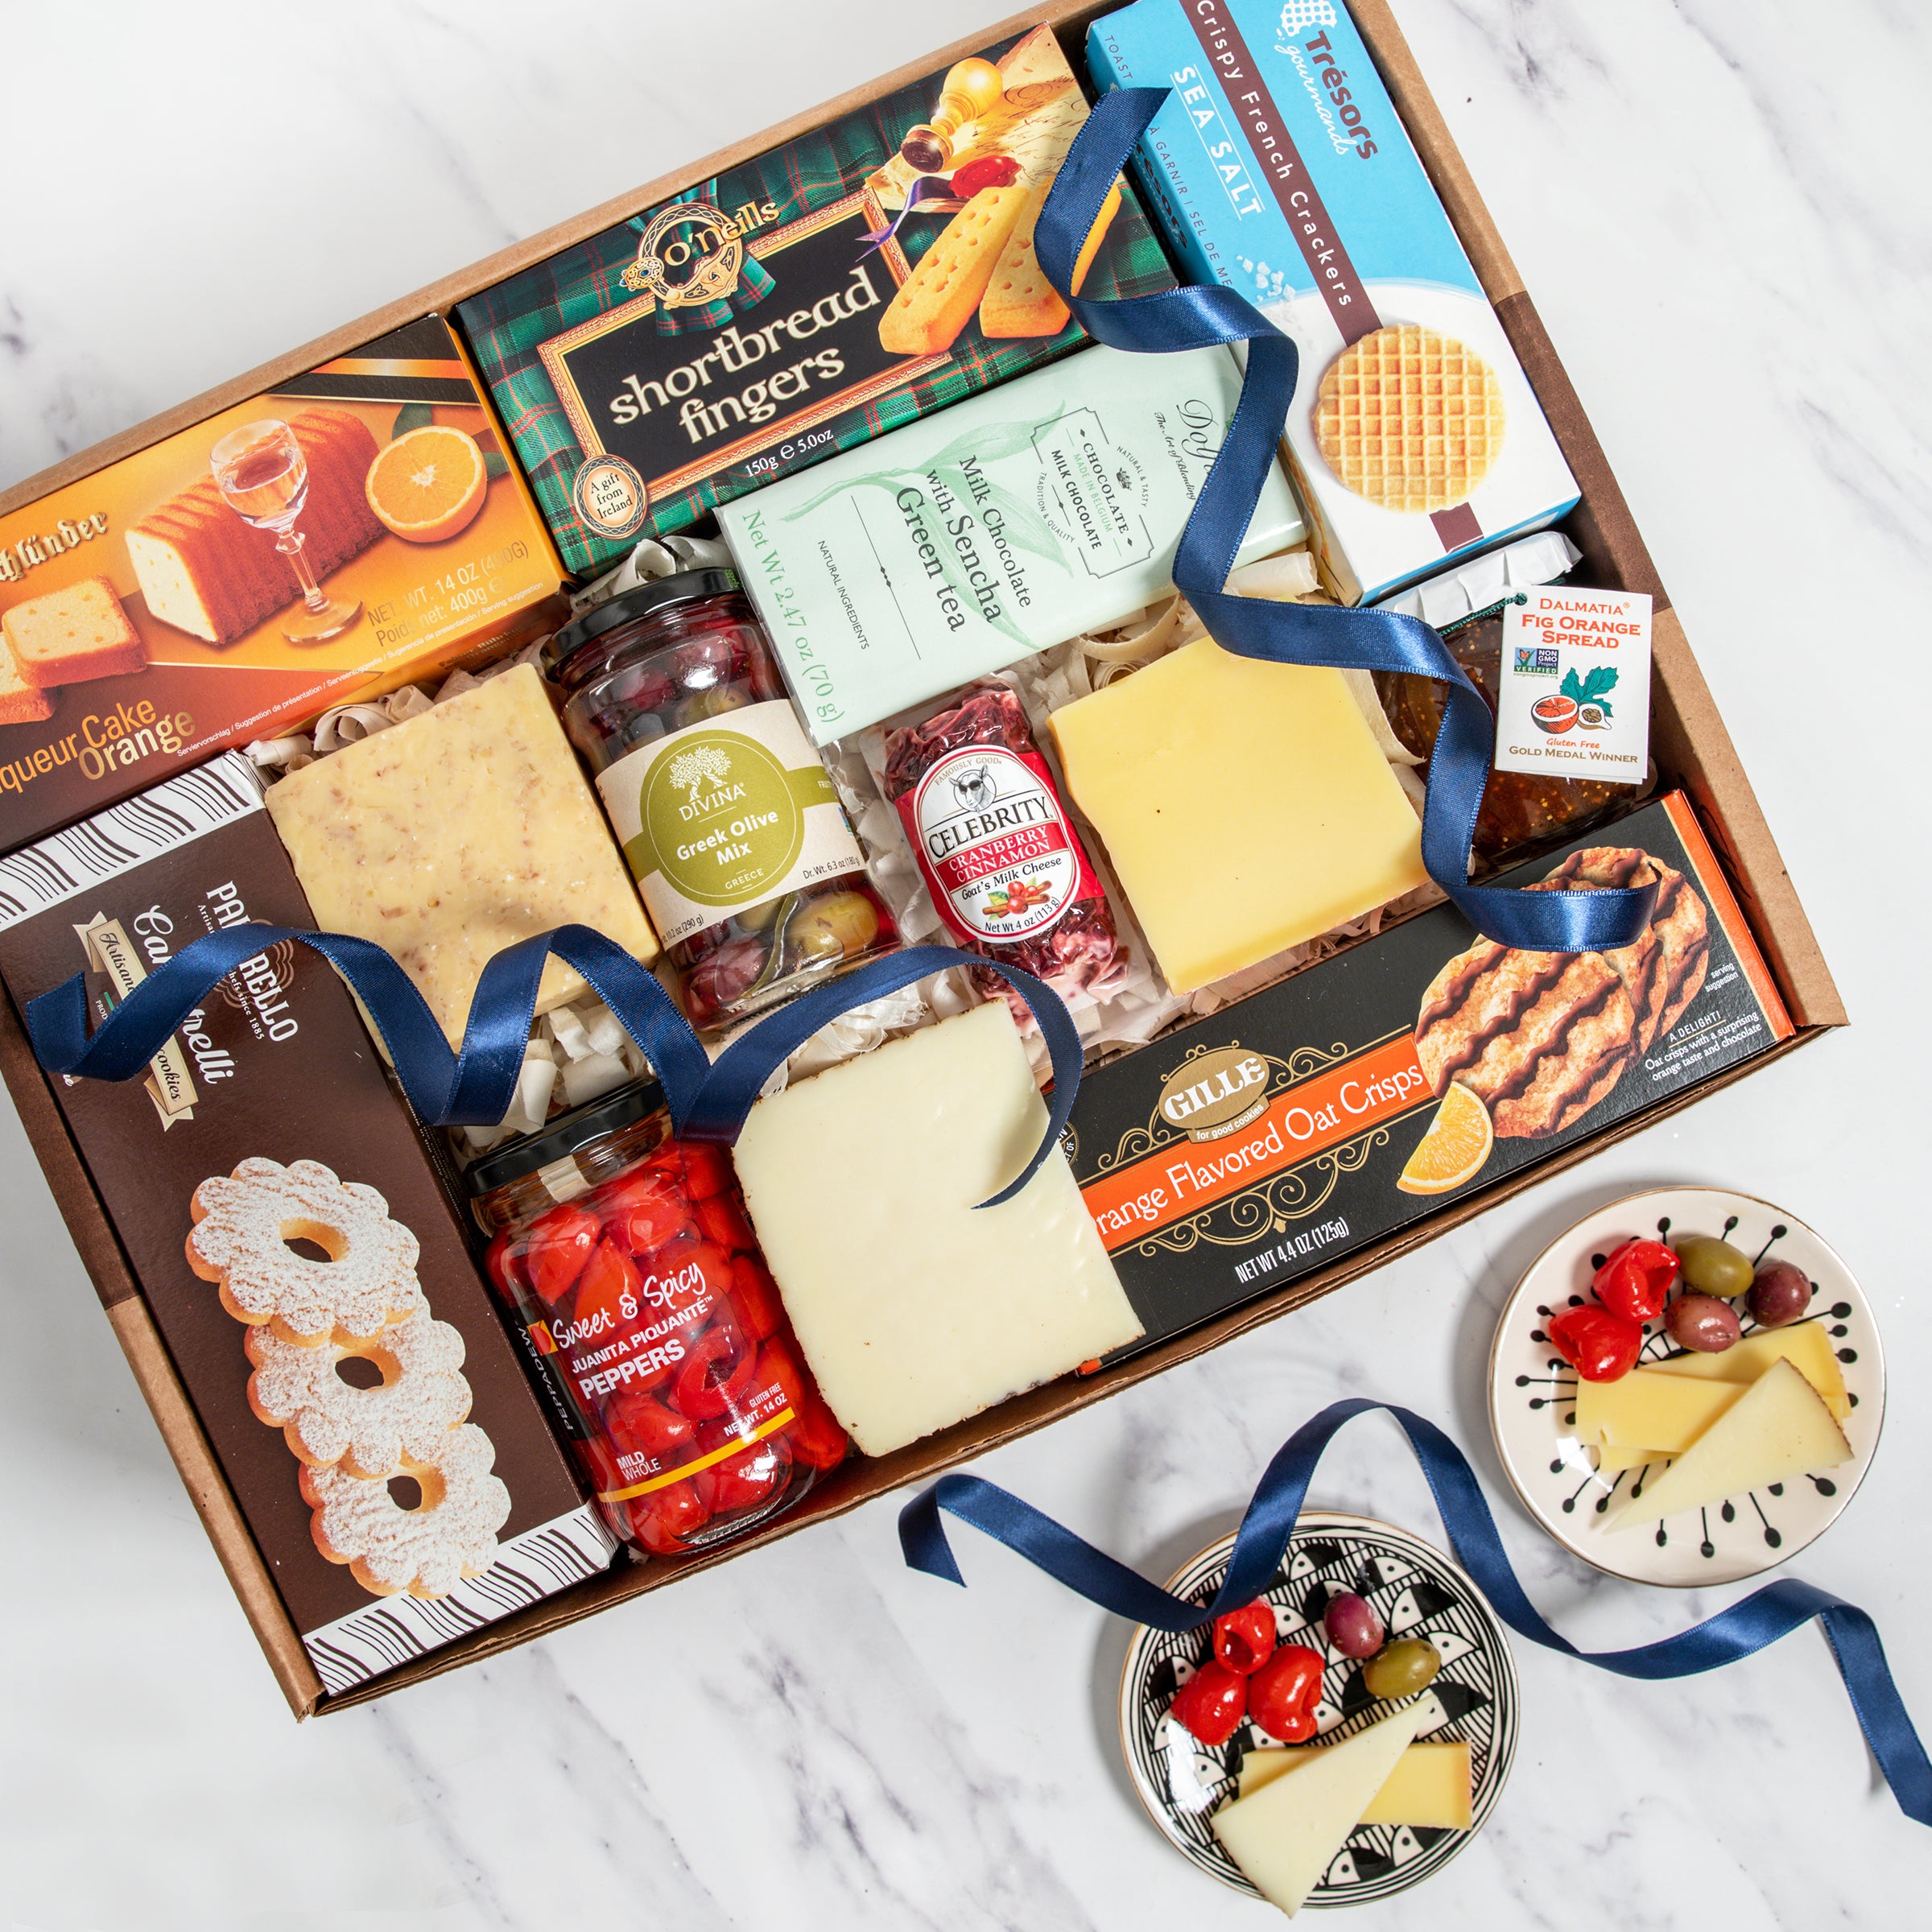 Euro Food Depot - Gift Box Gourmet 7 items - French Gourmet Food